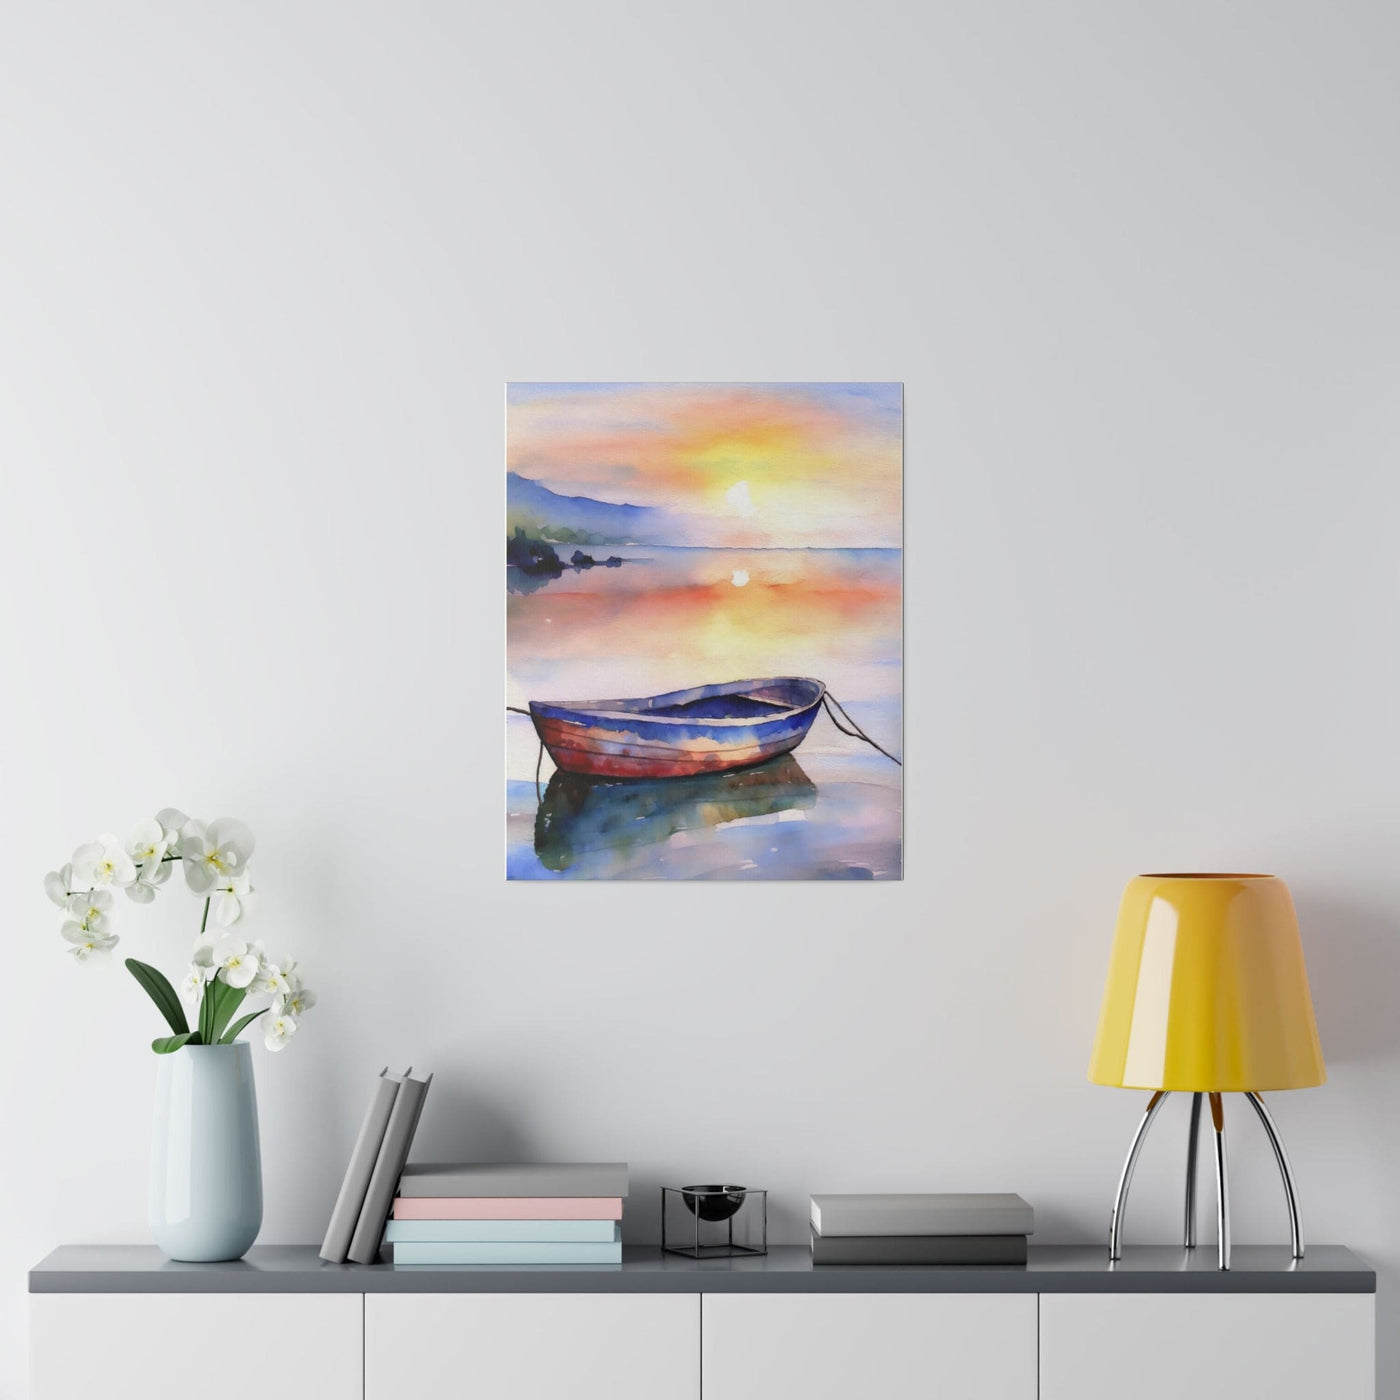 Wall Art Decor Print for Living Room Office Wall Decor Bedroom Artwork Soothing